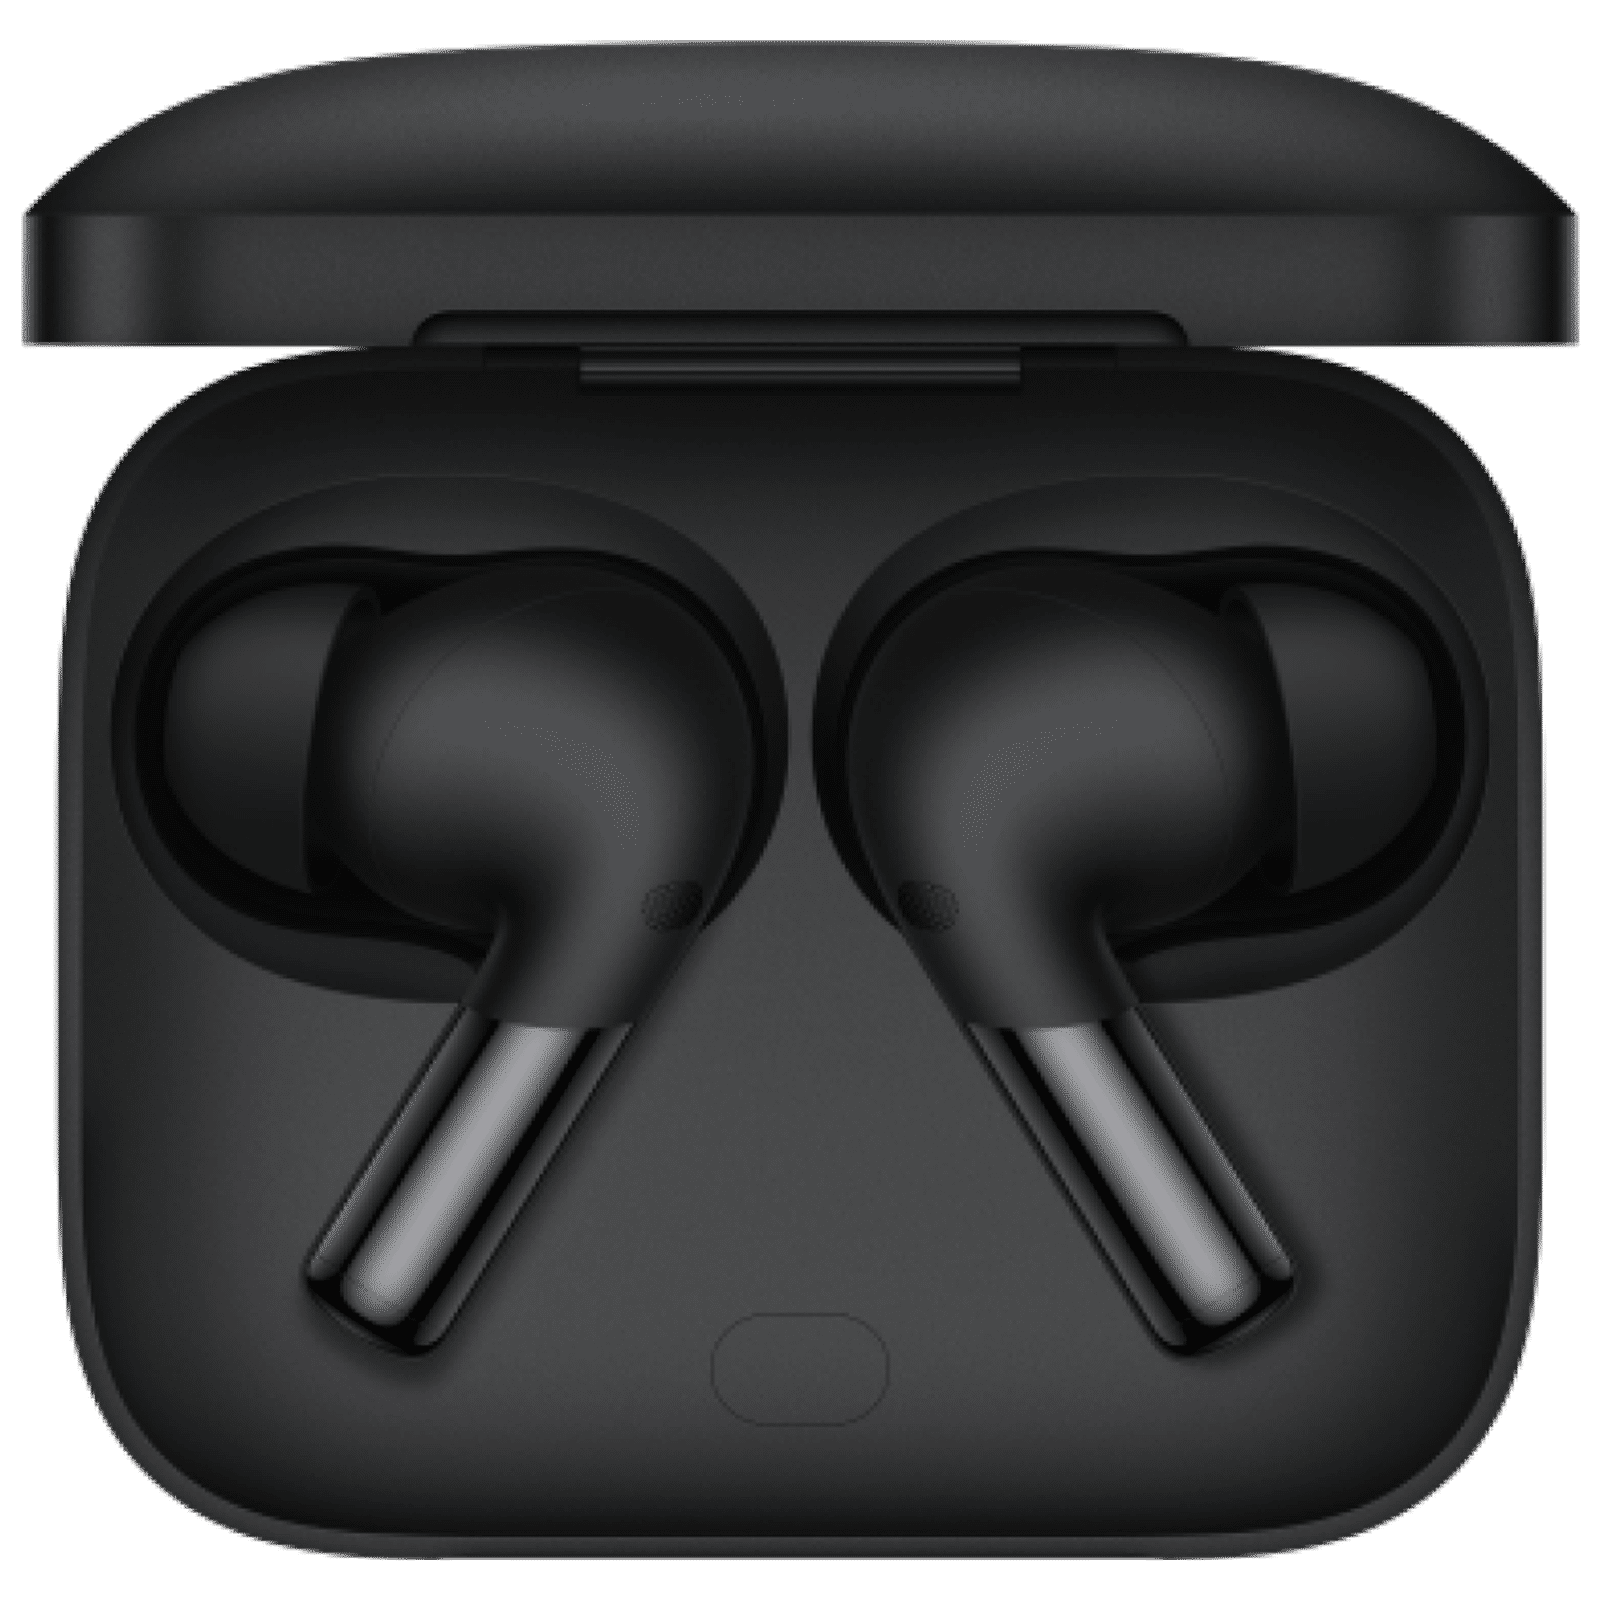 Buy OnePlus Buds Z2 TWS Earbuds with Active Noise Cancellation